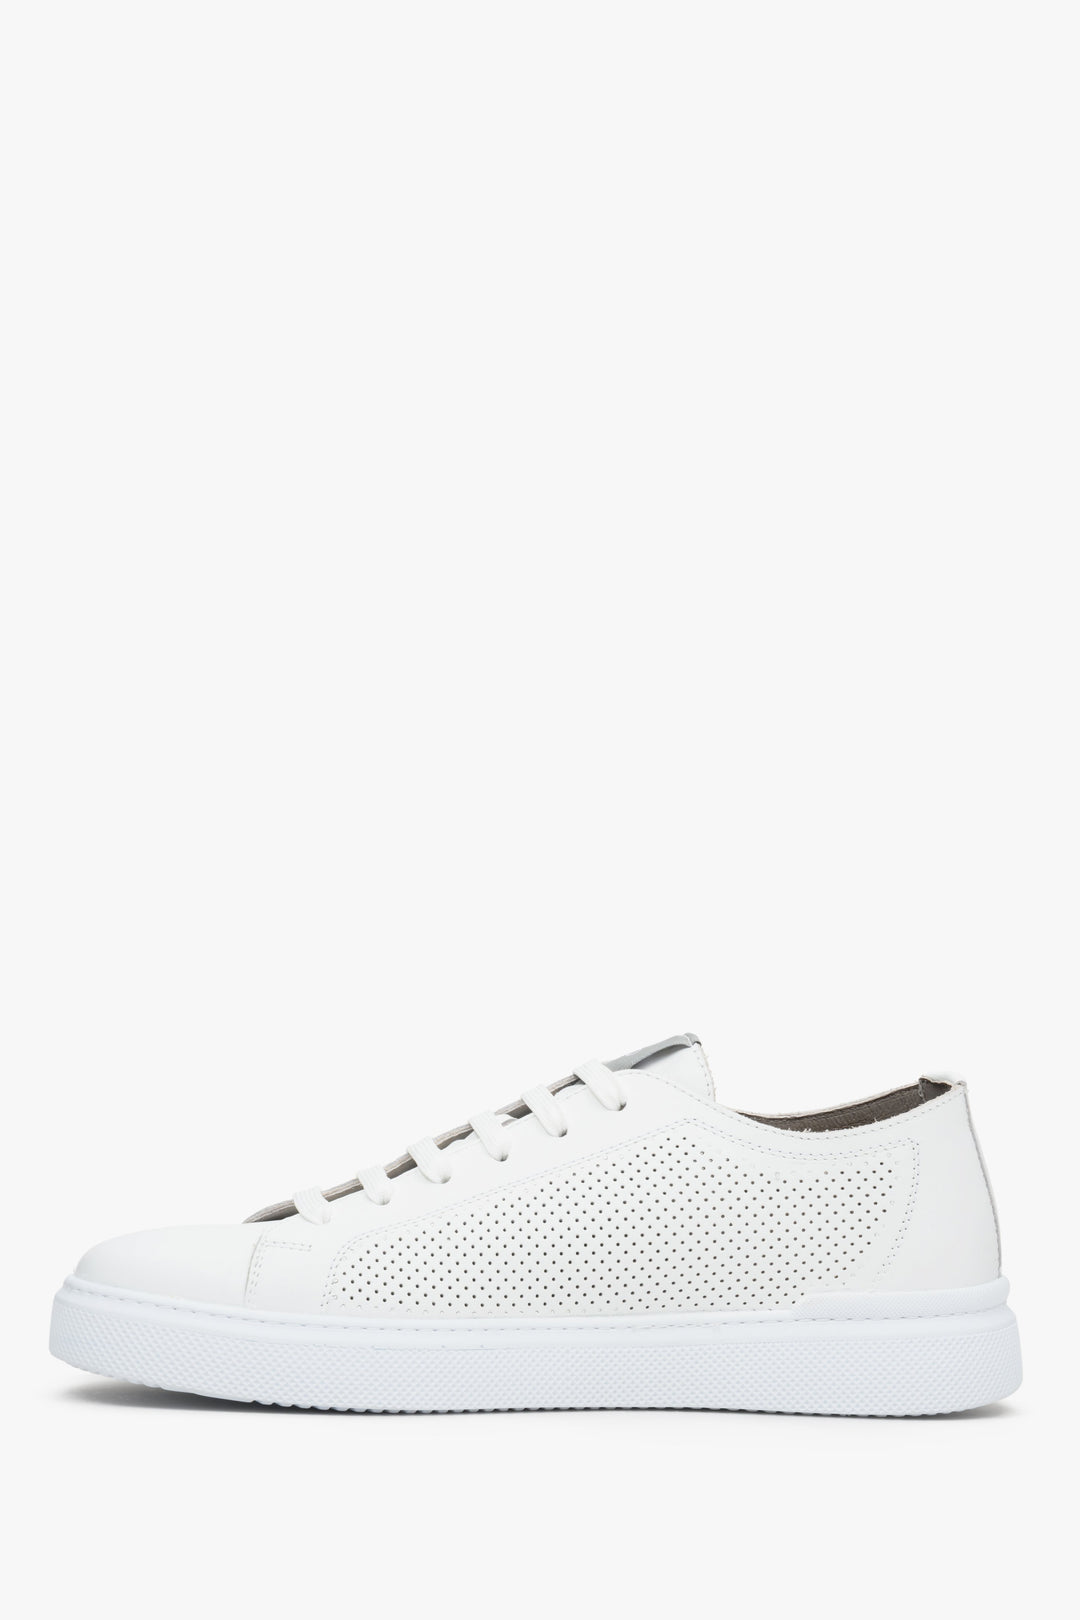 Men's summer sneakers in white, perforated of Estro brand. 